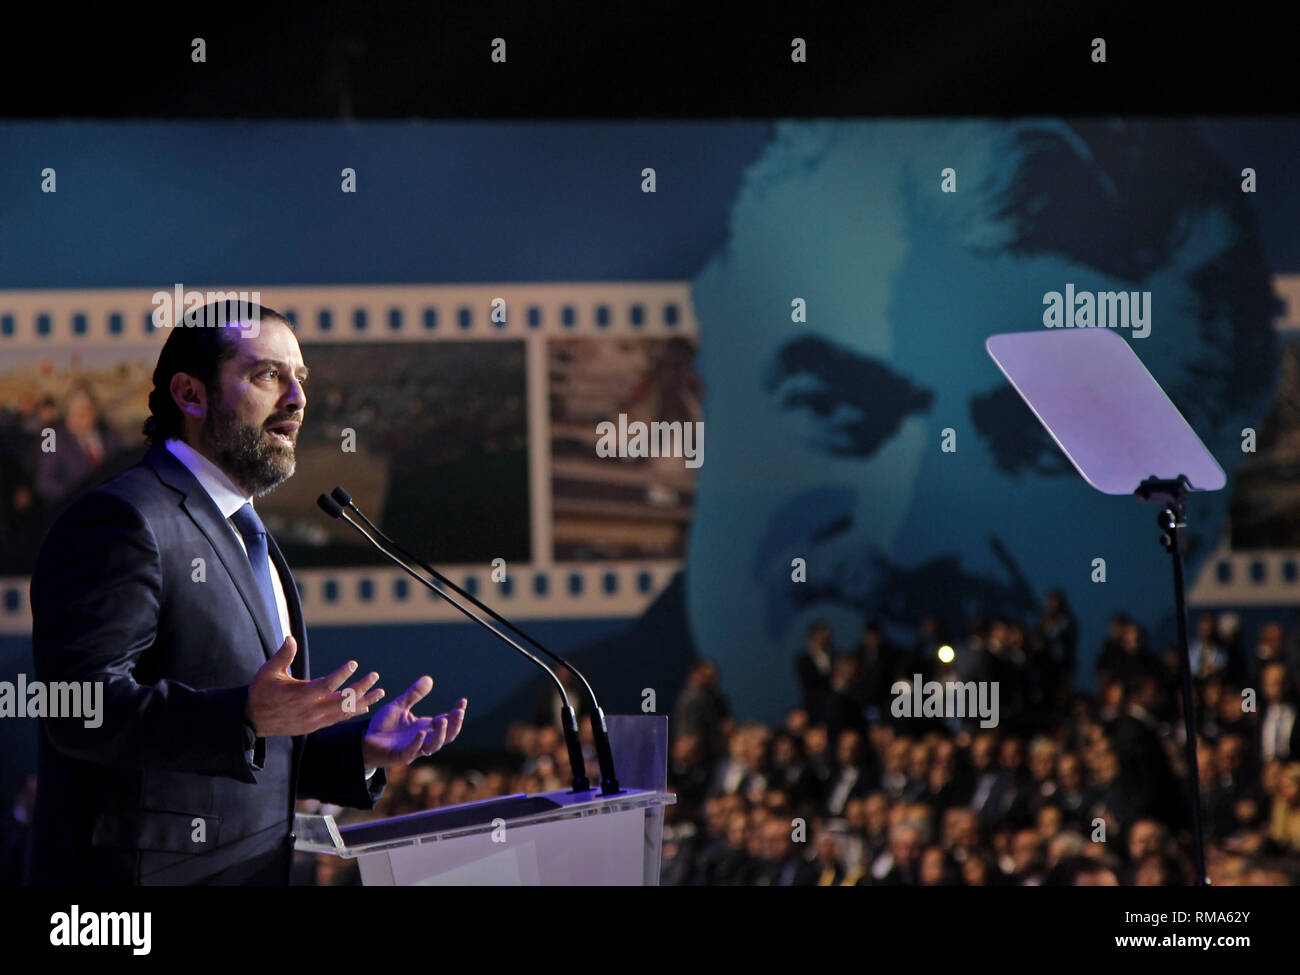 Beirut, Lebanon. 14th Feb, 2019. Lebanese Prime Minister Saad Hariri gives a speach during a mass rally to mark the 14th anniversary of the assassintaion of former Prime Minister Rafic Hariri. Credit: Marwan Naamani/dpa/Alamy Live News Stock Photo